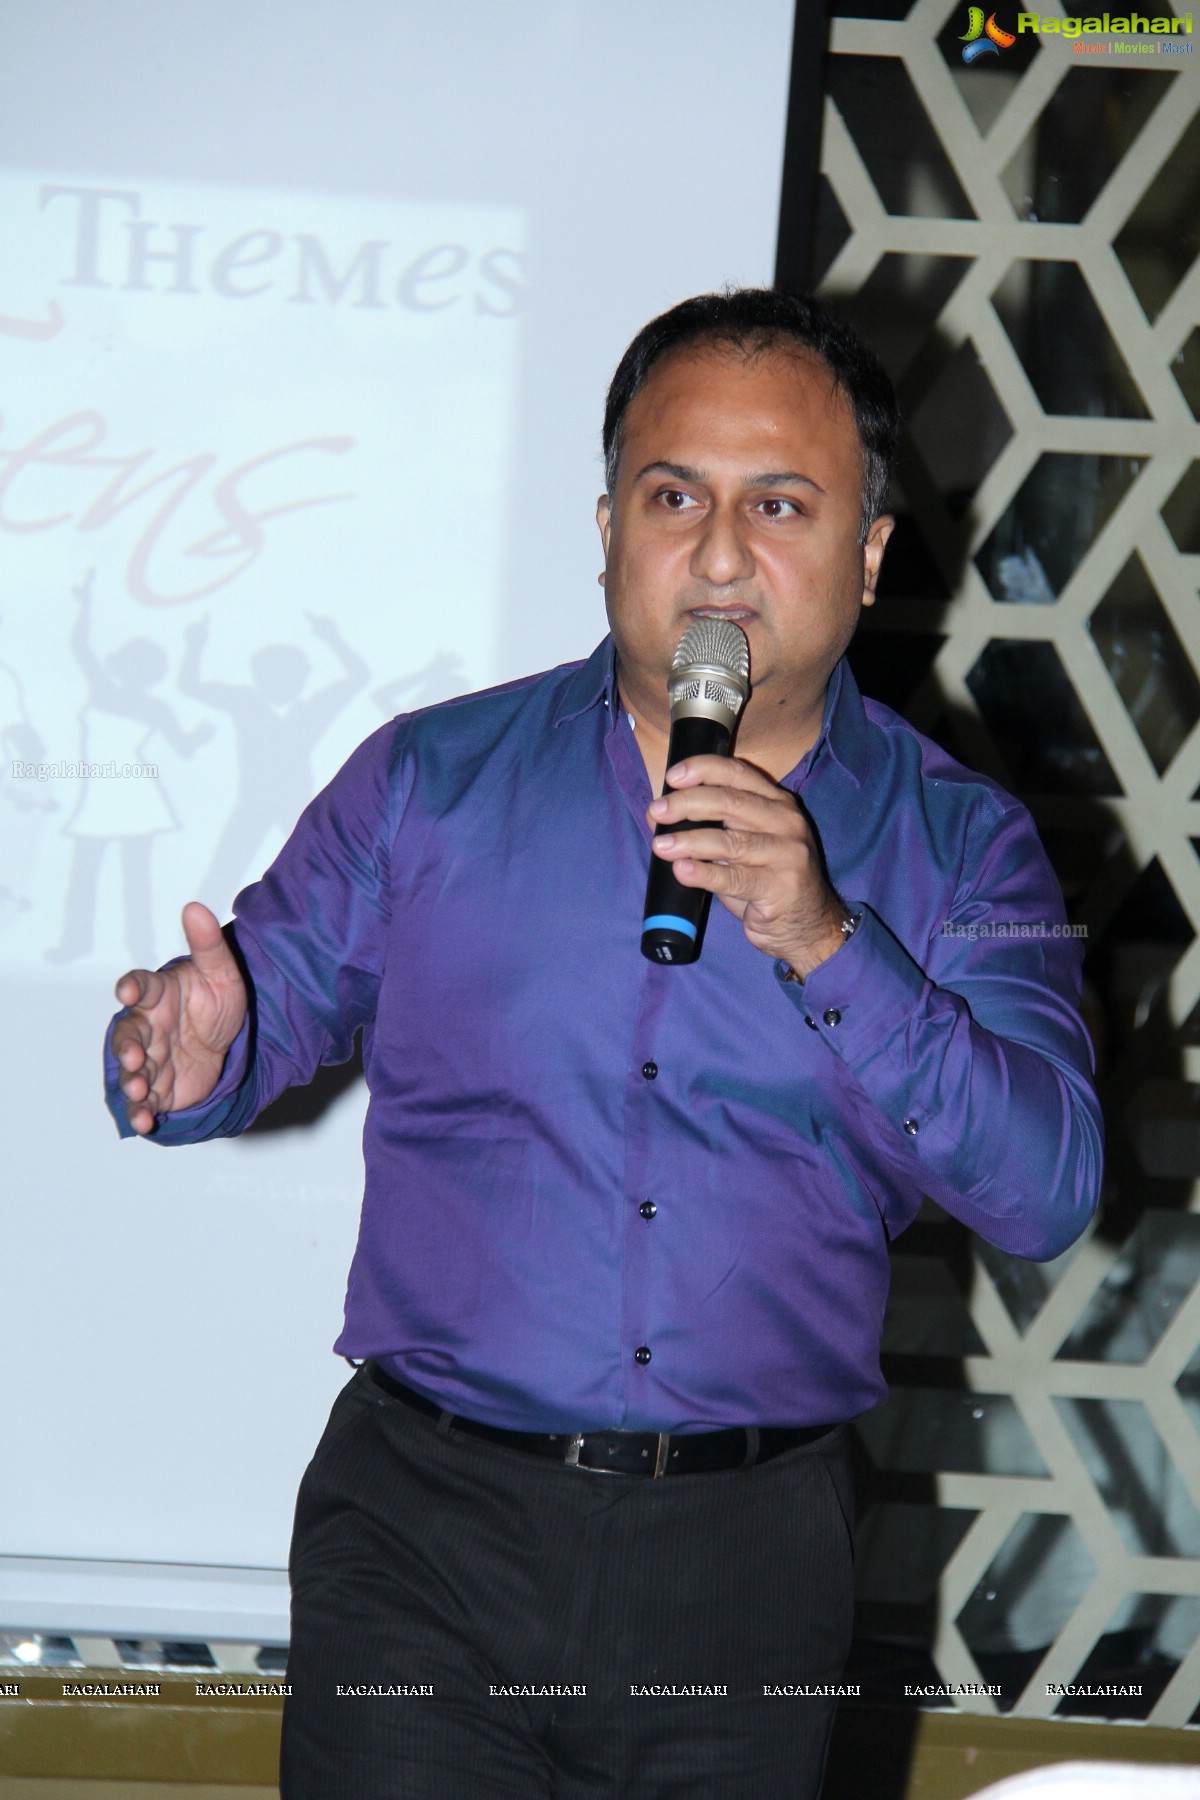 Lektrif Clubbing App Launch Party at The Park, Hyderabad